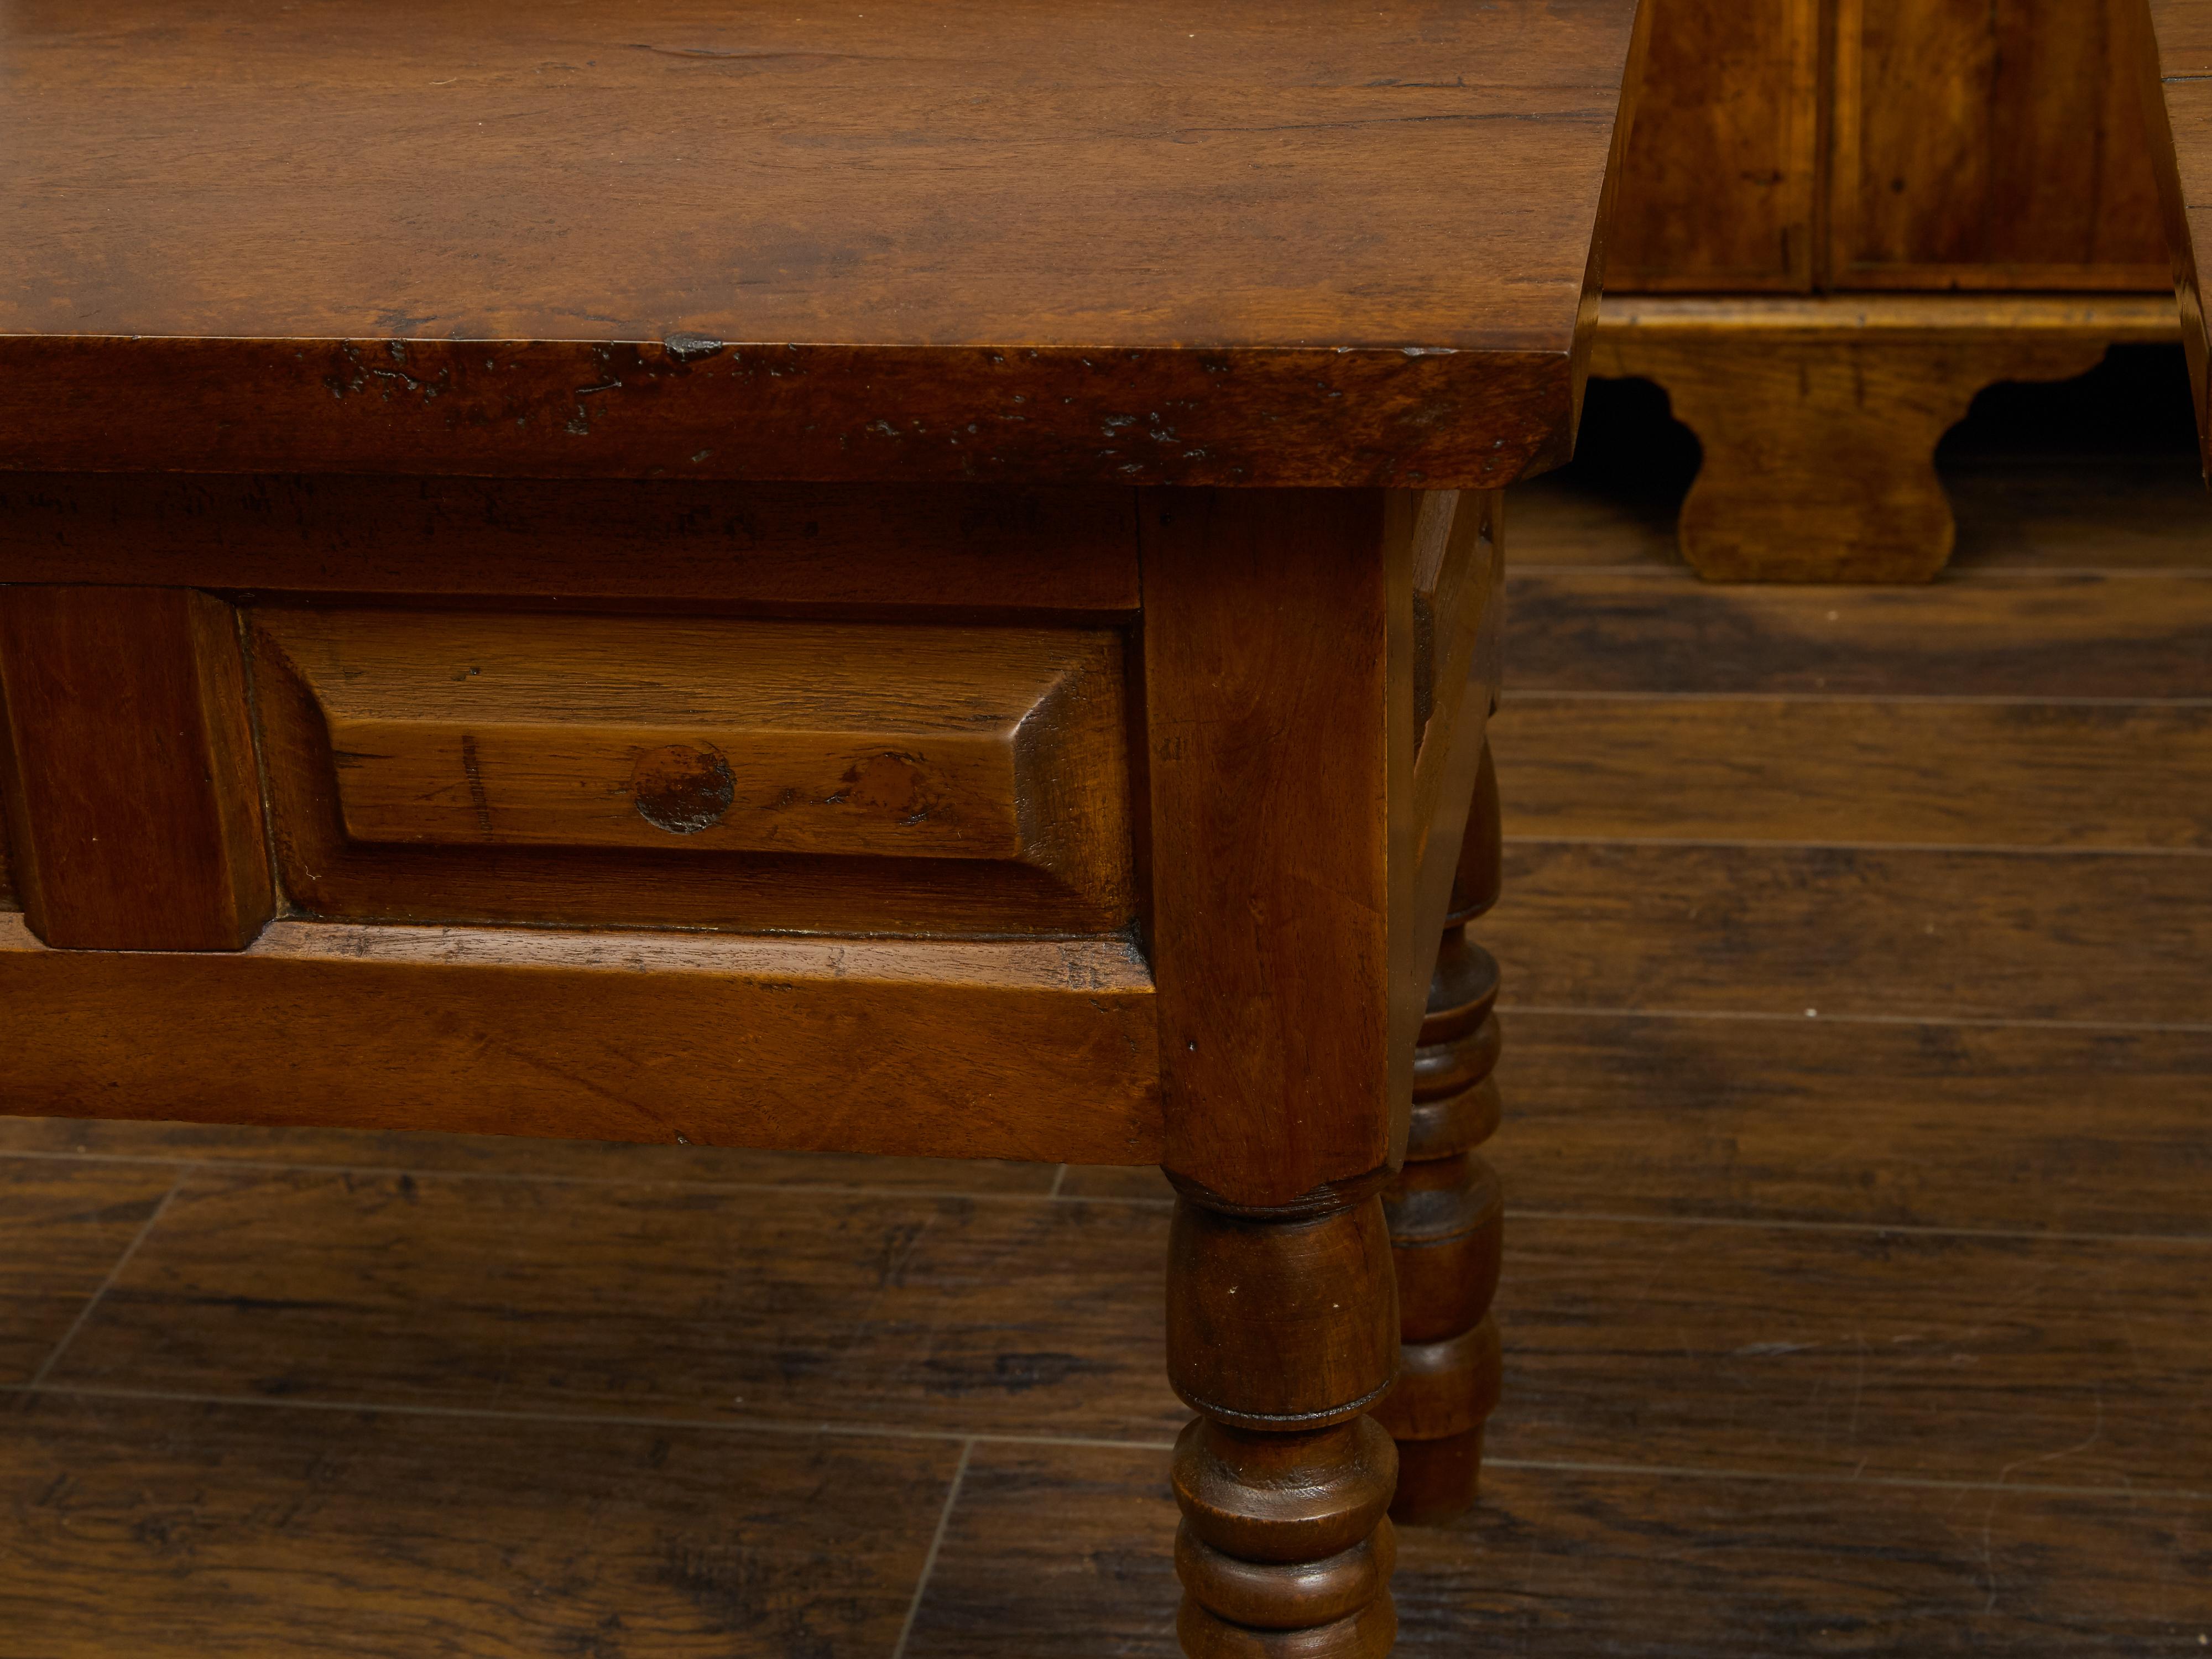 European Pair of 19th Century Walnut Side Tables with Raised Panels and Turned Legs